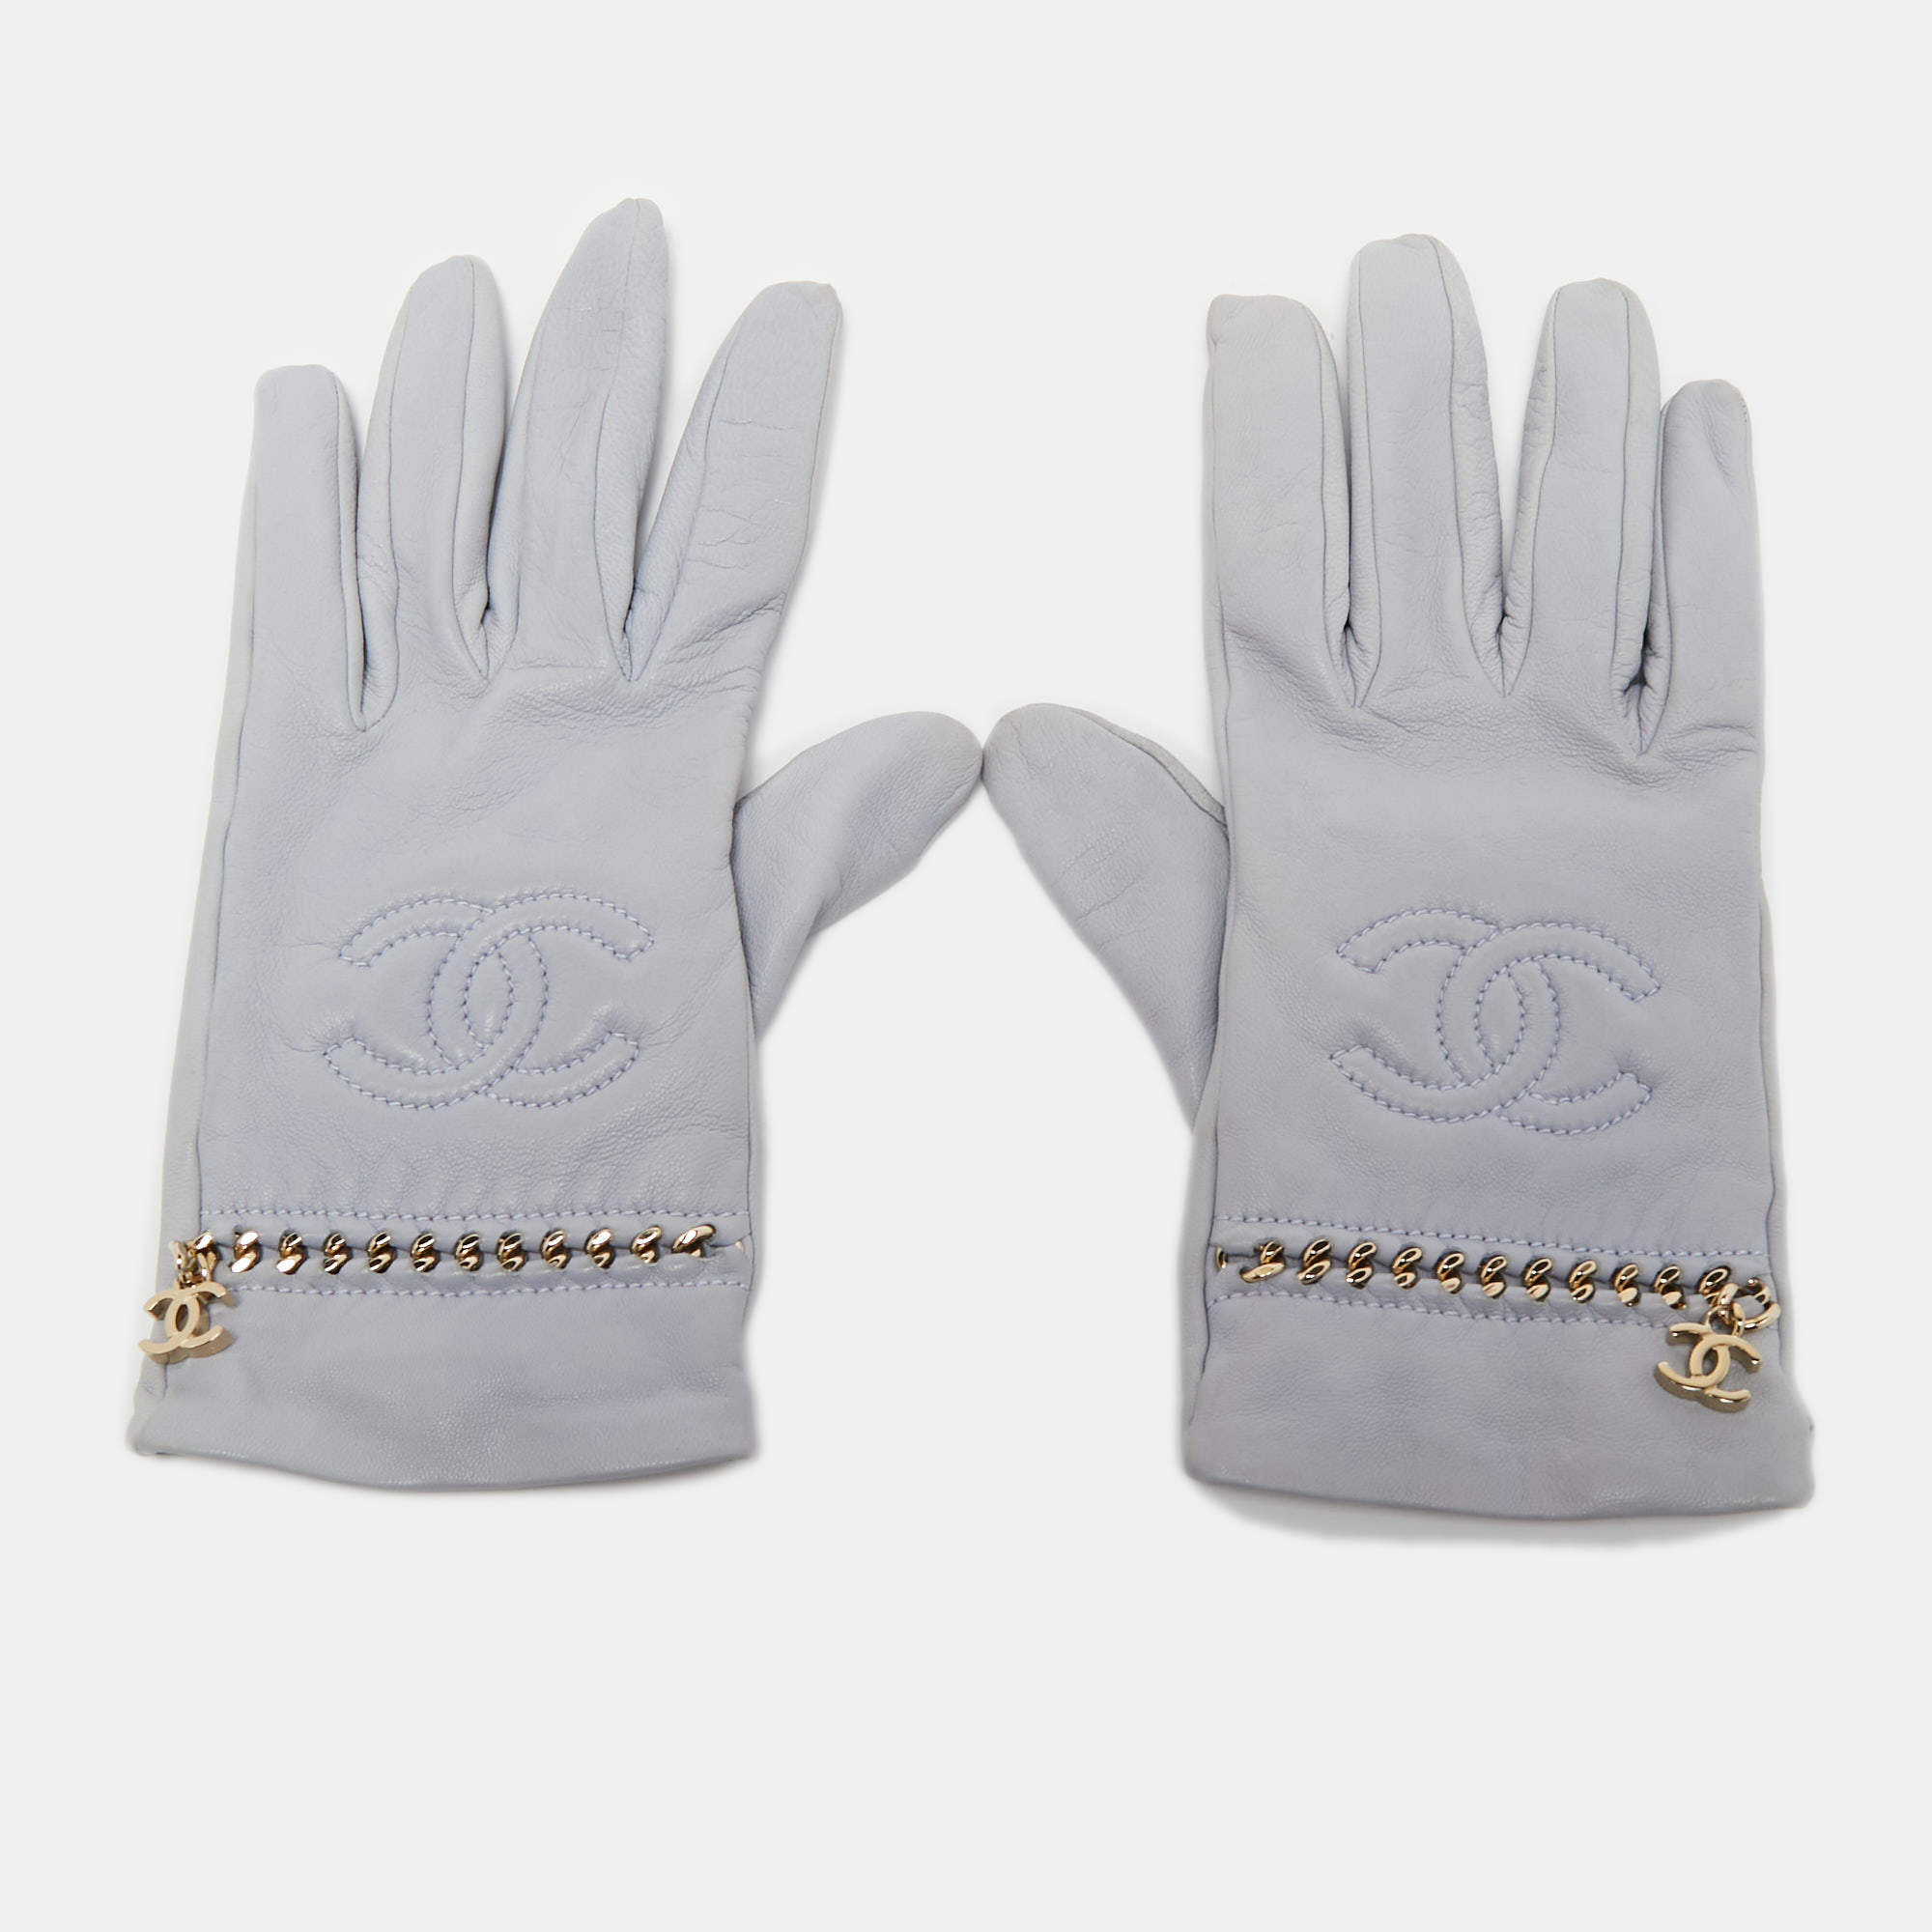 Chanel Light Blue Leather CC Chain Gloves Size 8 Chanel